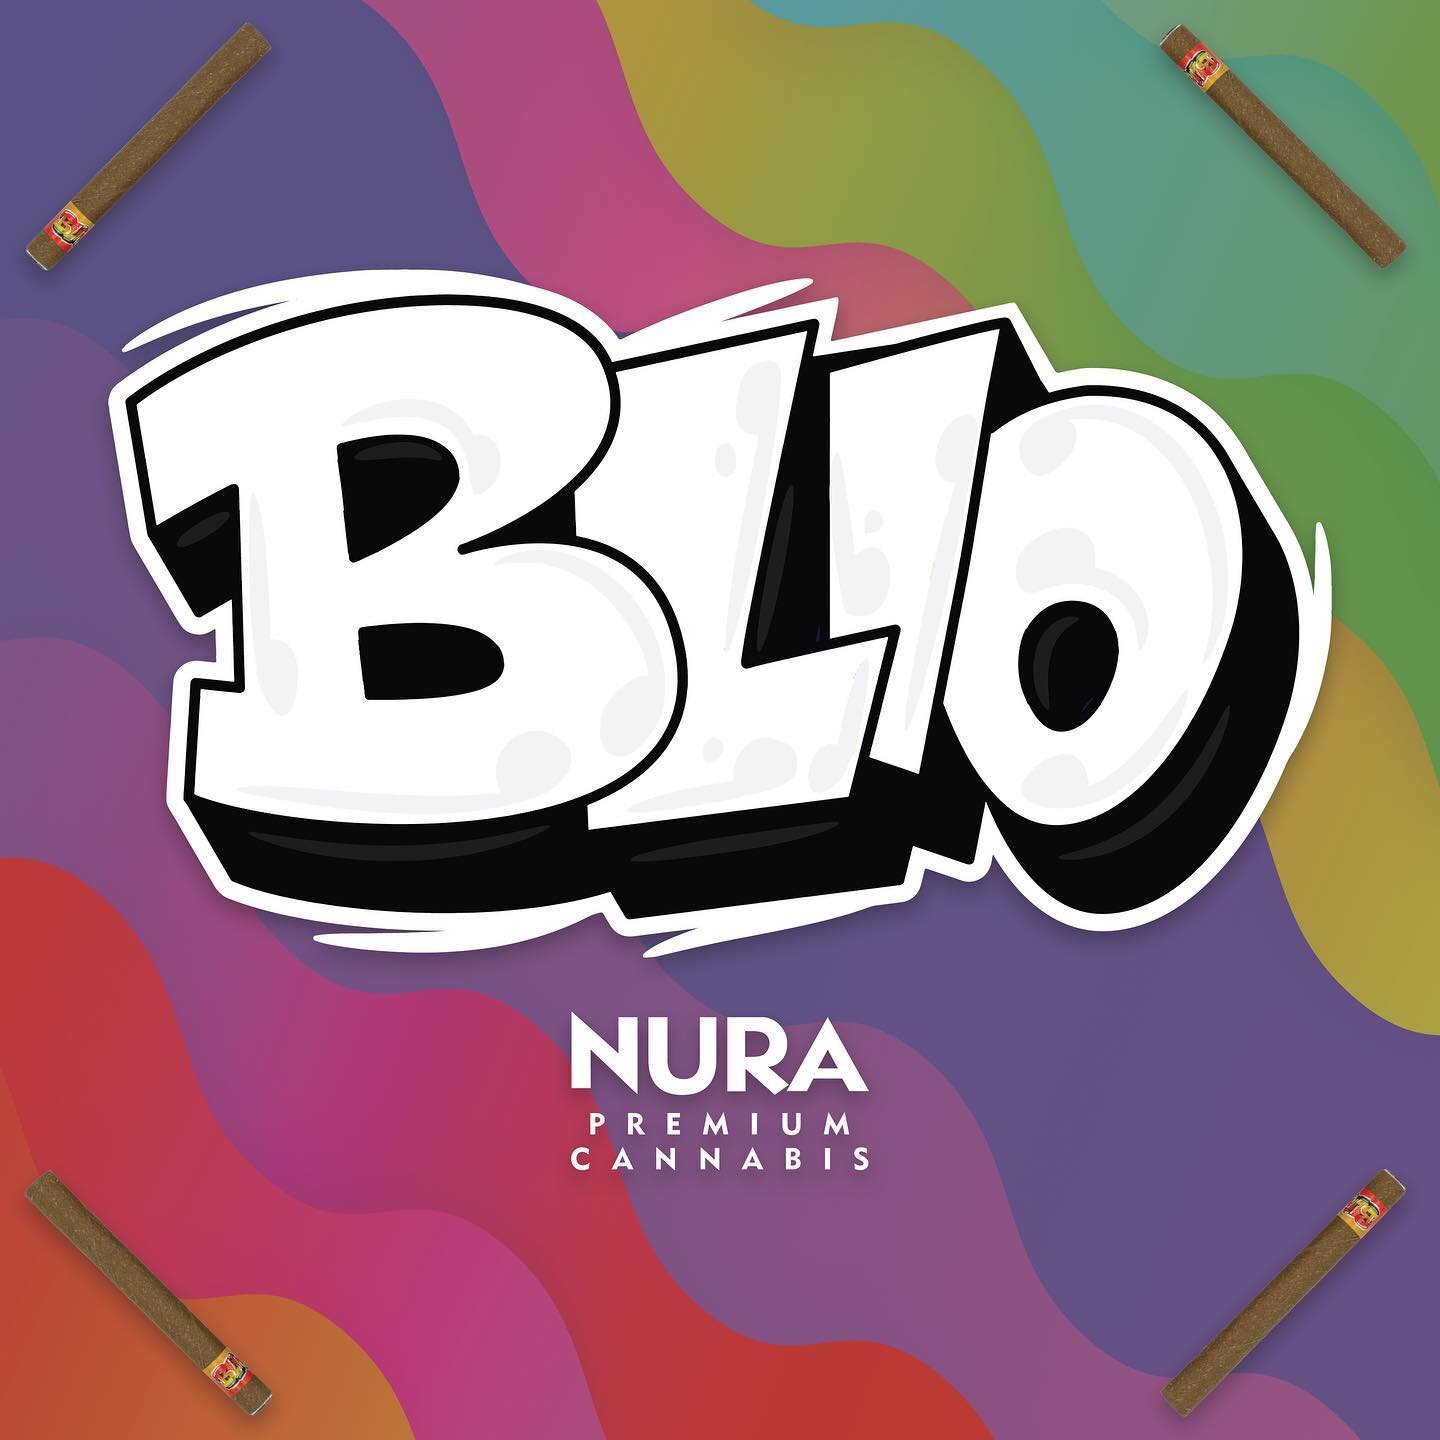 Combining Premium Nura flower, a 100% natural hemp wrap, and a glass tip filter to create a unique, flavorful smoking experience.

Blio Blunts by #NuraCannabis 🔥

NOTHING FOR SALE. EDUCATIONAL PURPOSES ONLY.